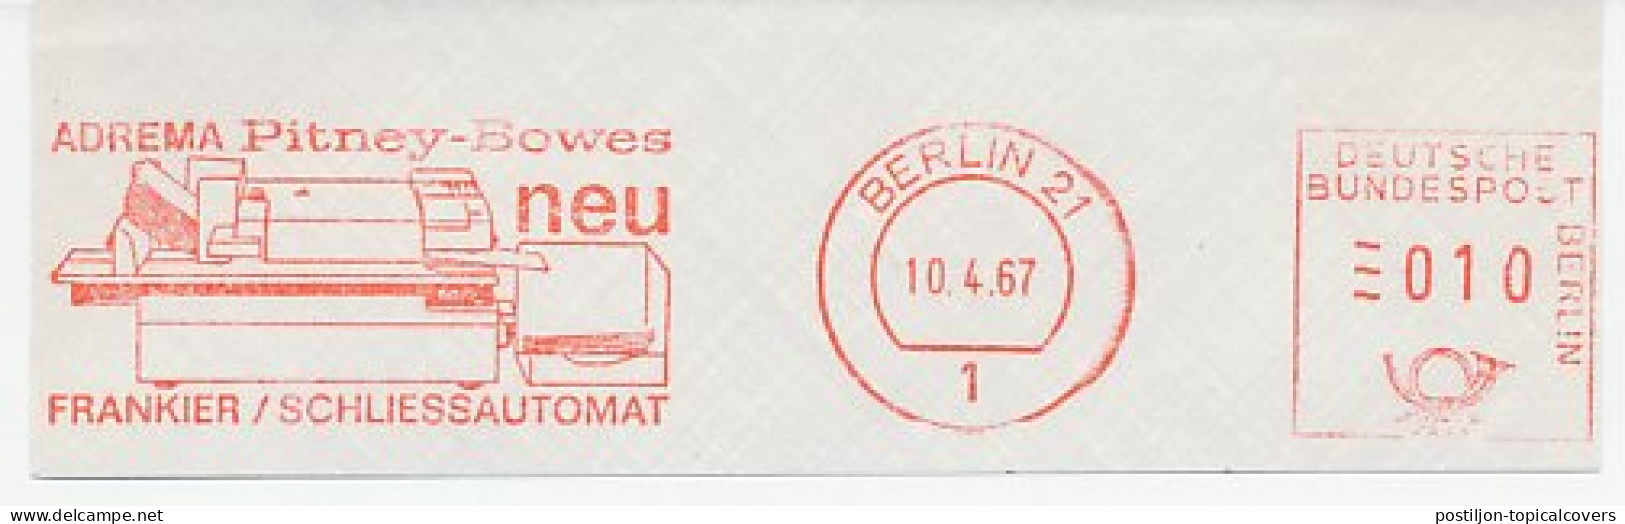 Meter Cut Germany 1967 Pitney Bowes- Adrema - Franking Machine - Timbres De Distributeurs [ATM]